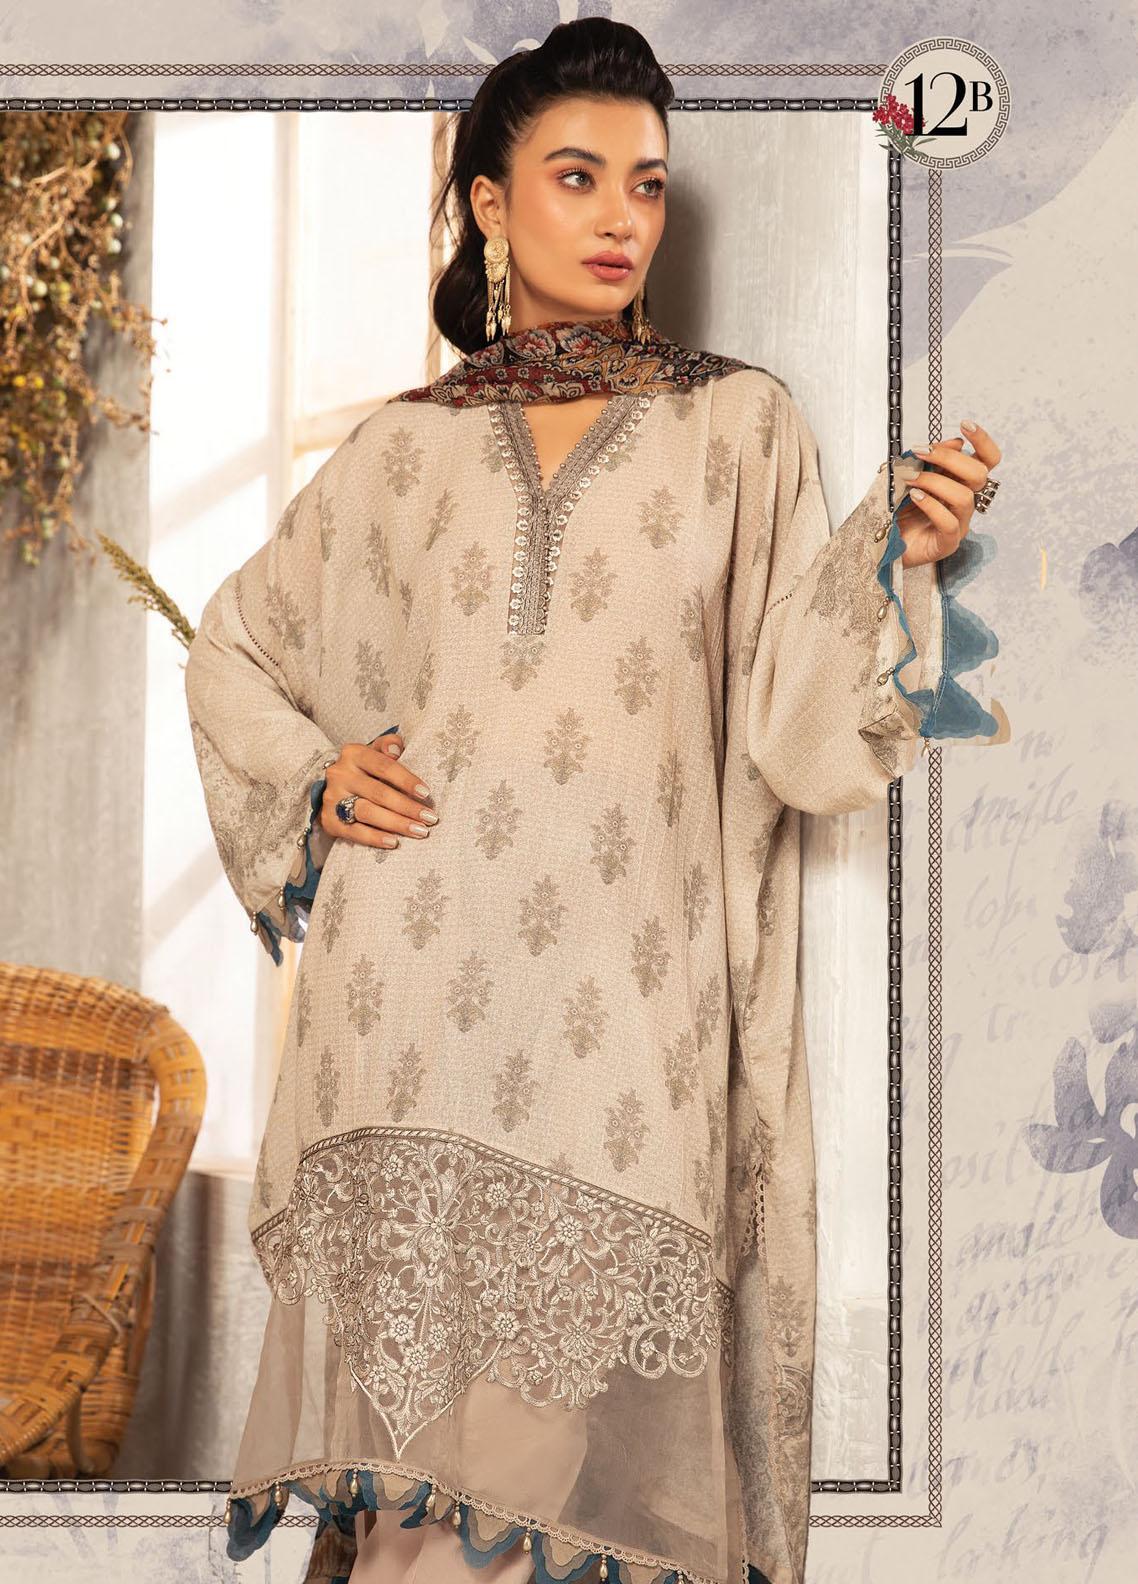 Maria B Mprints Embroidered Karandi Suit Unstitched 3 Piece 12B – Winter Collection